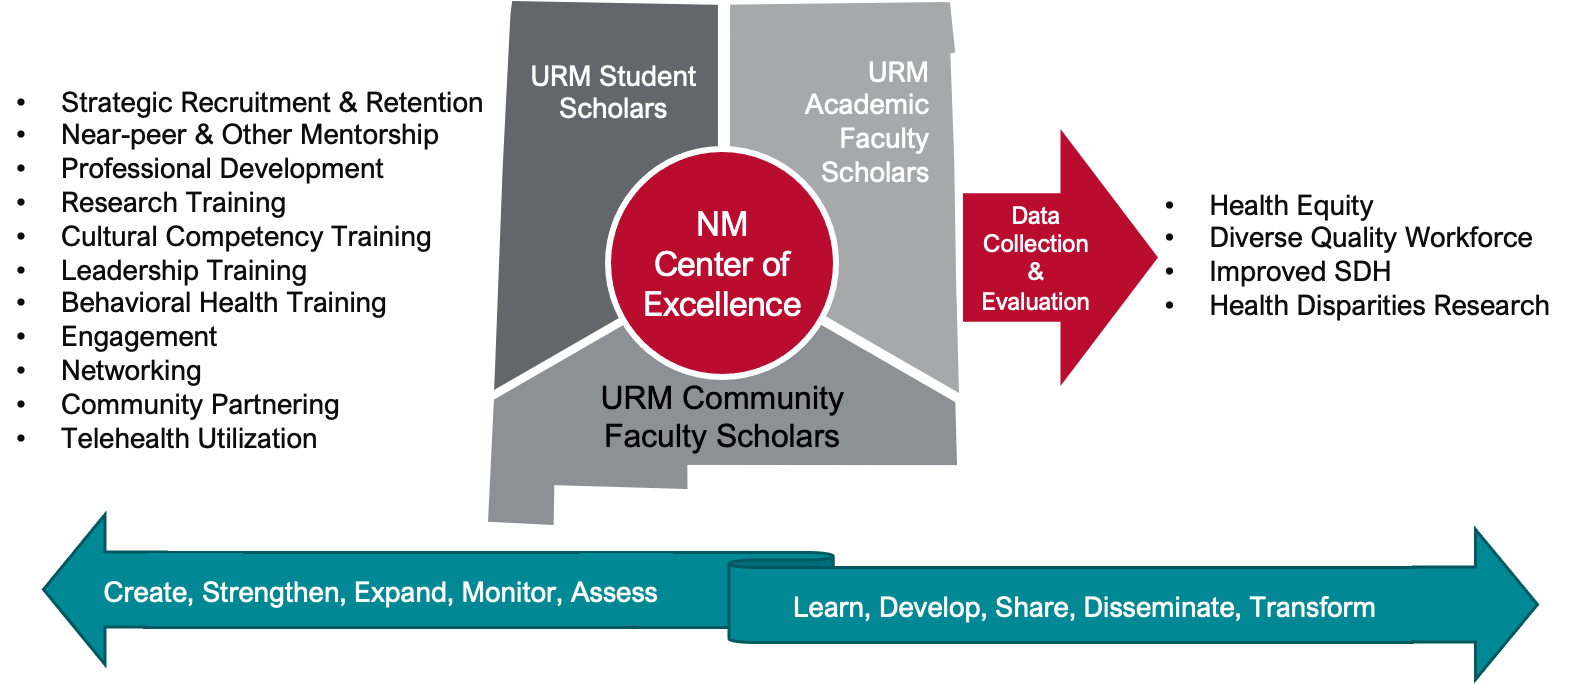 a chart showing the functions and relationships of URM and NM Center of Excellence